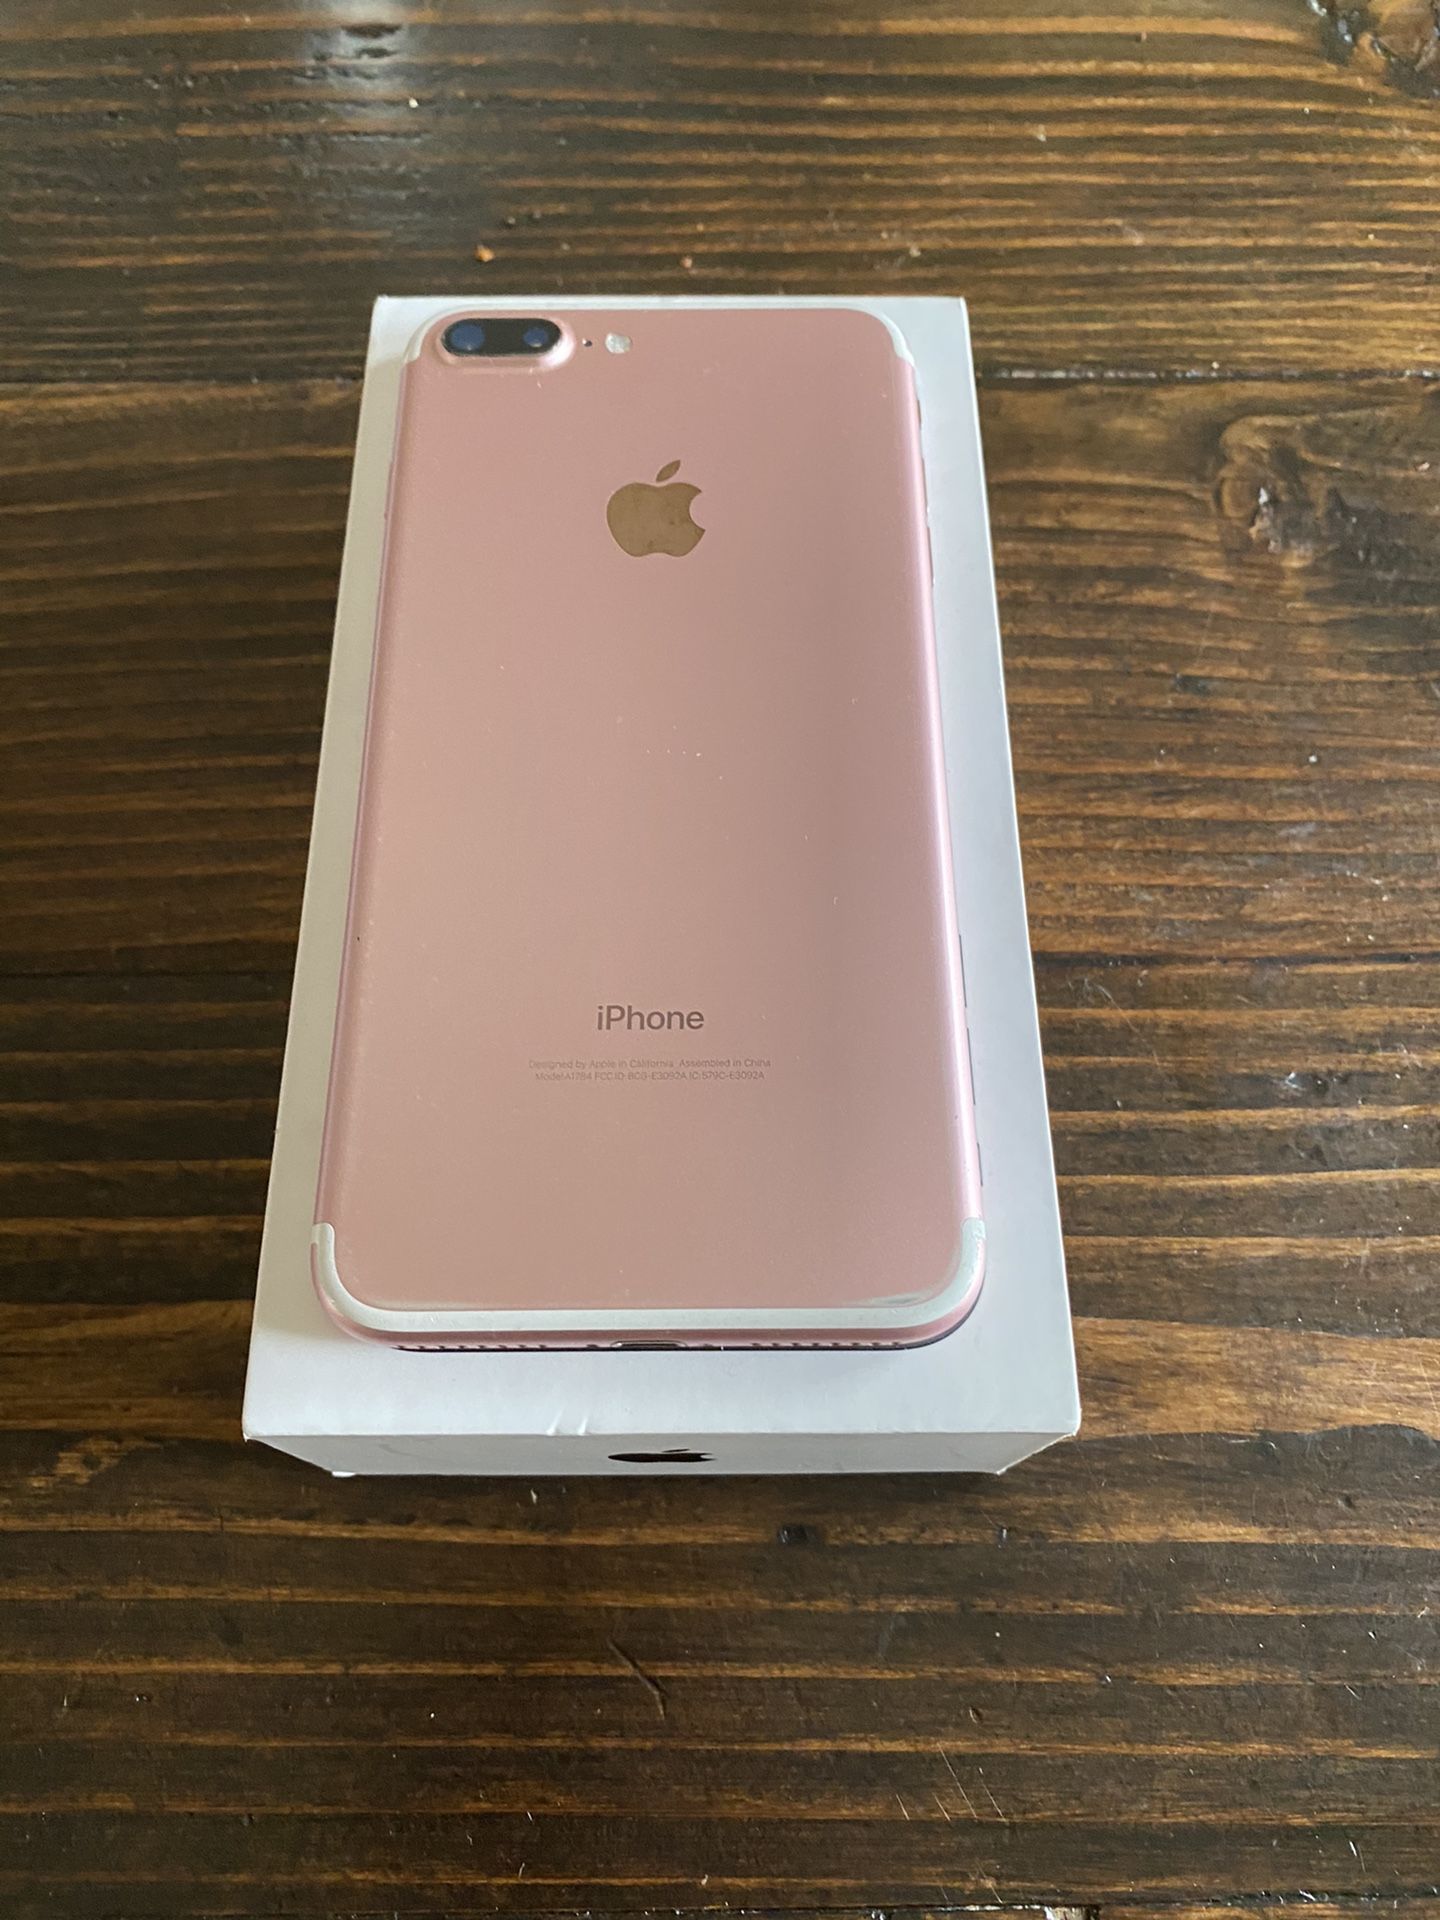 Pink / white / iPhone 7 Plus 128gb // unlocked for AT&T cricket . Estamos// disponibles para servirles //